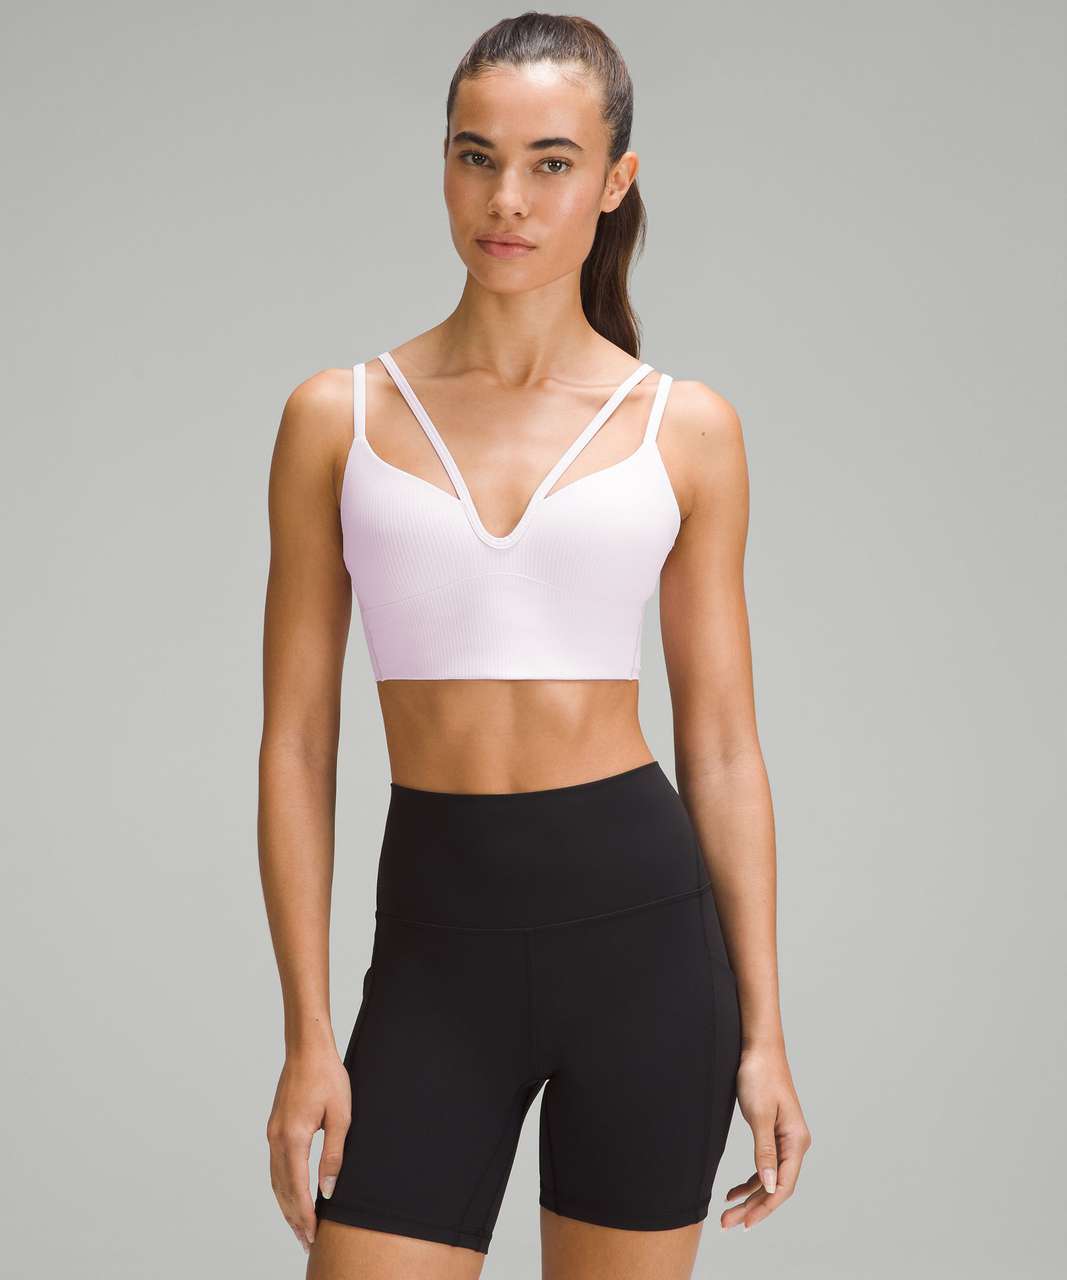 Lululemon Like a Cloud Strappy Longline Ribbed Bra *Light Support, B/C Cup - Meadowsweet Pink